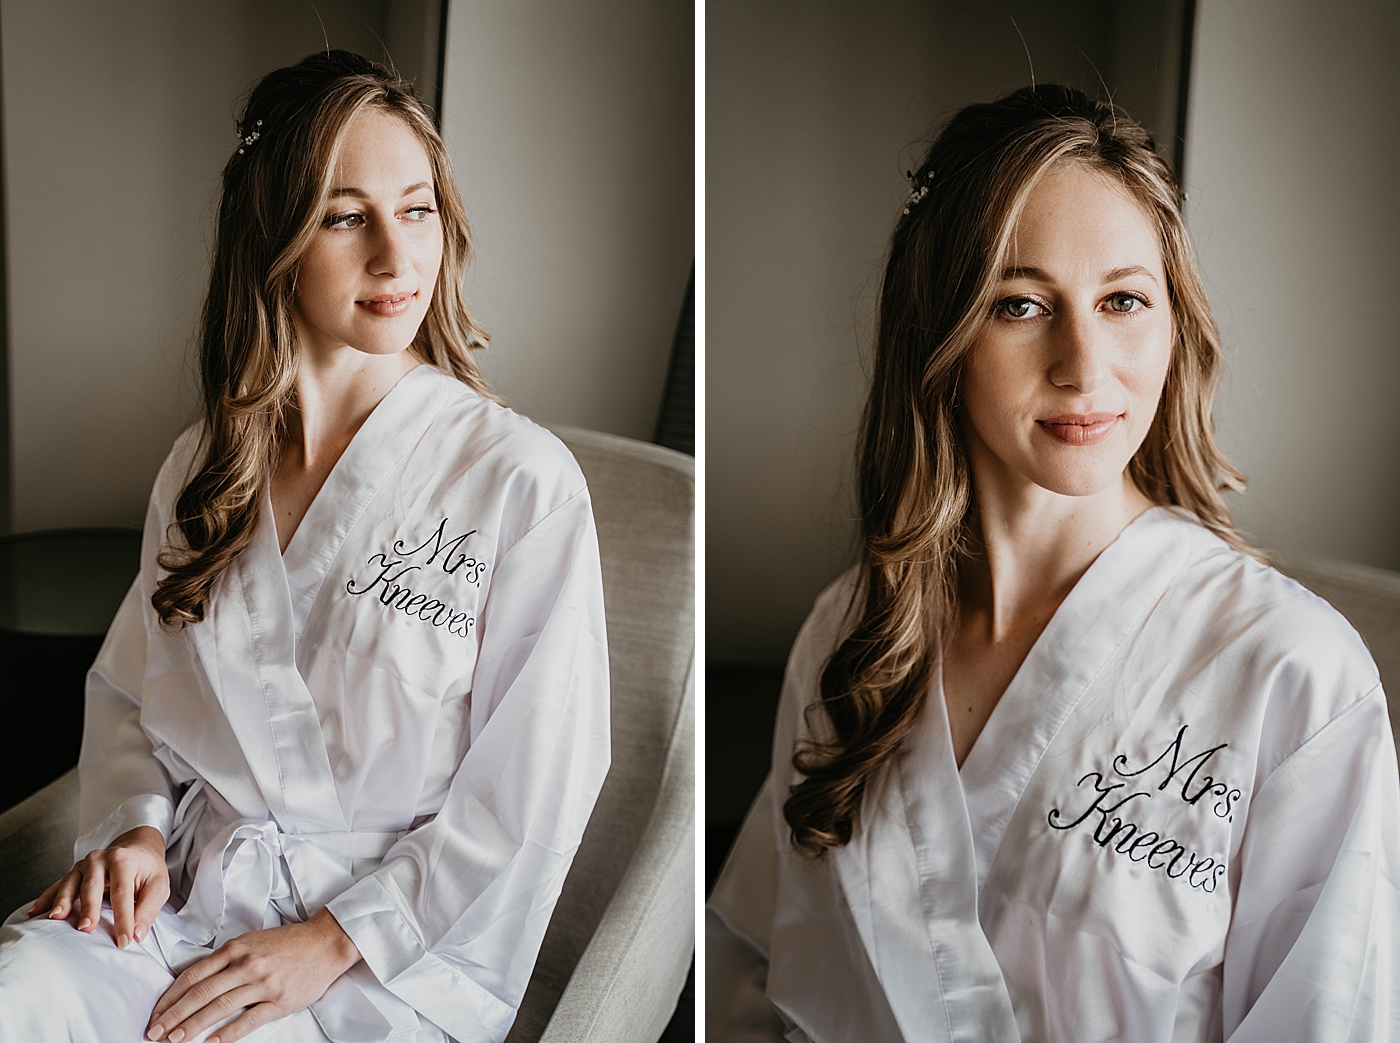 Brde getting ready closeup portrait Waterstone Resort and Marina Wedding captured by South Florida Wedding Photographer Krystal Capone Photography